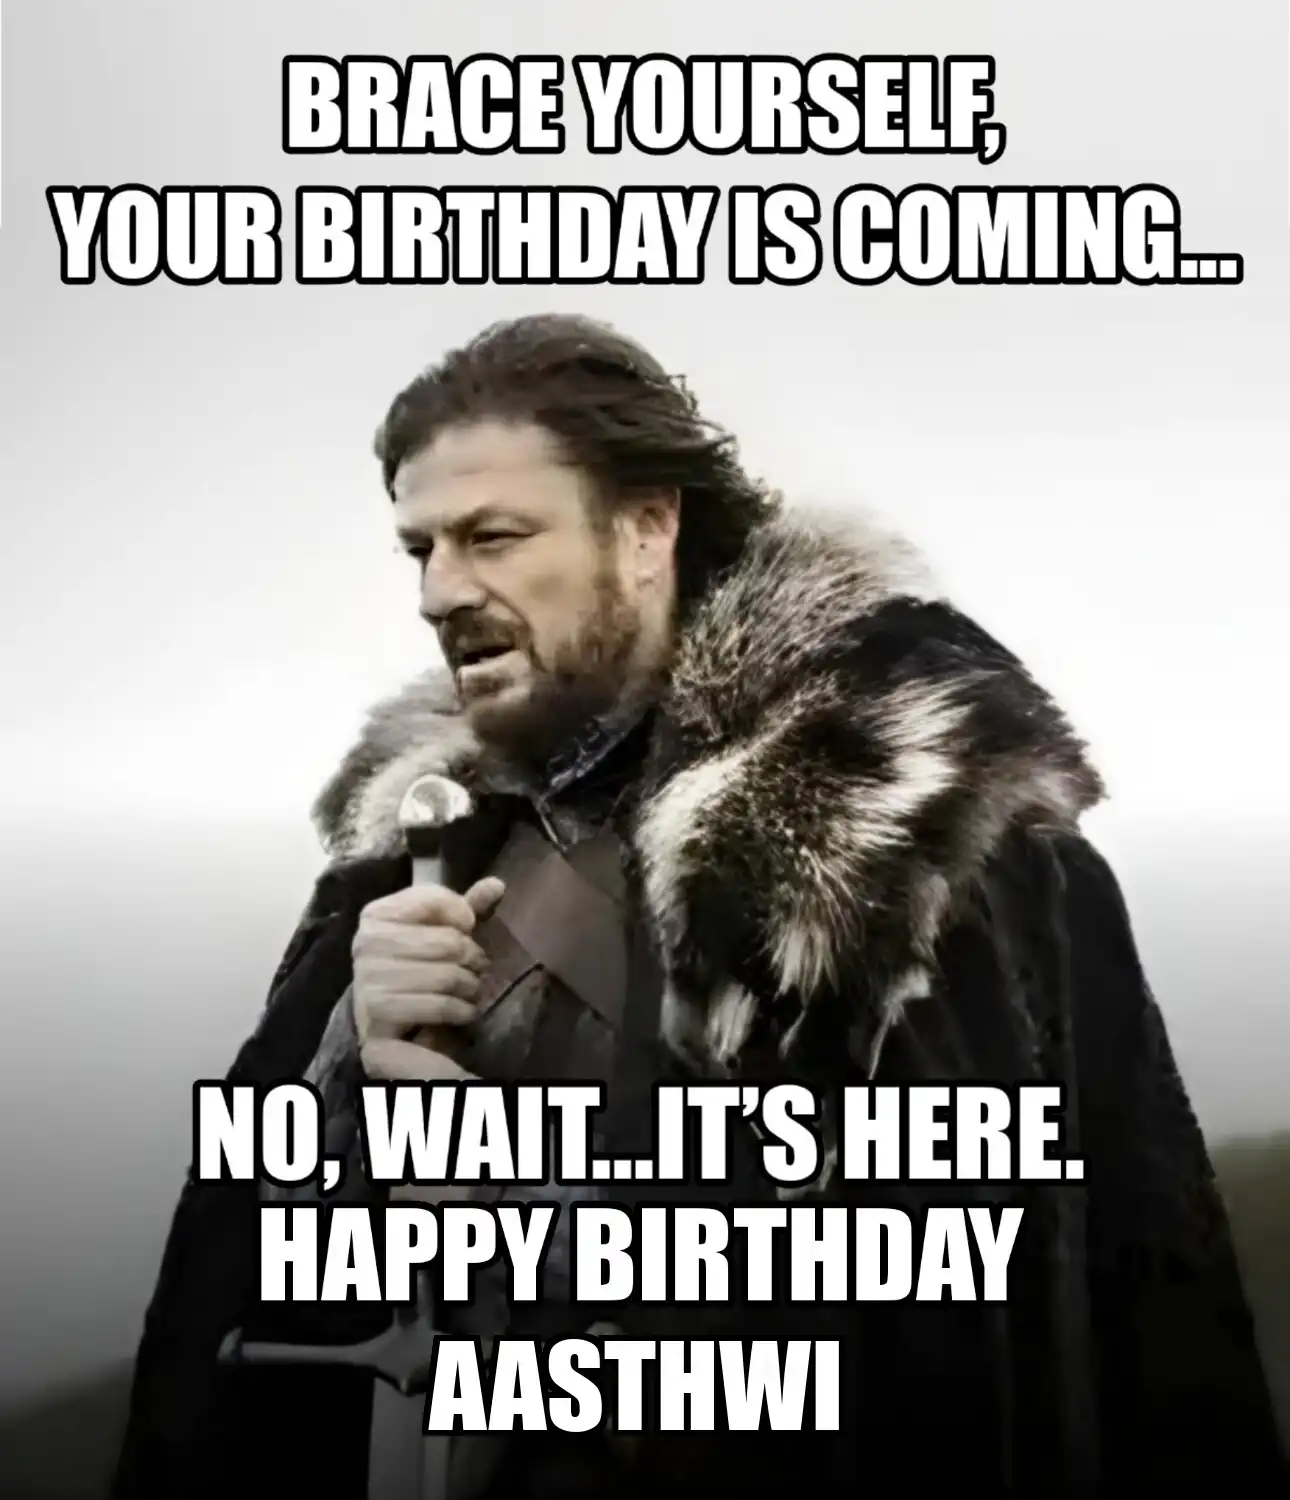 Happy Birthday Aasthwi Brace Yourself Your Birthday Is Coming Meme